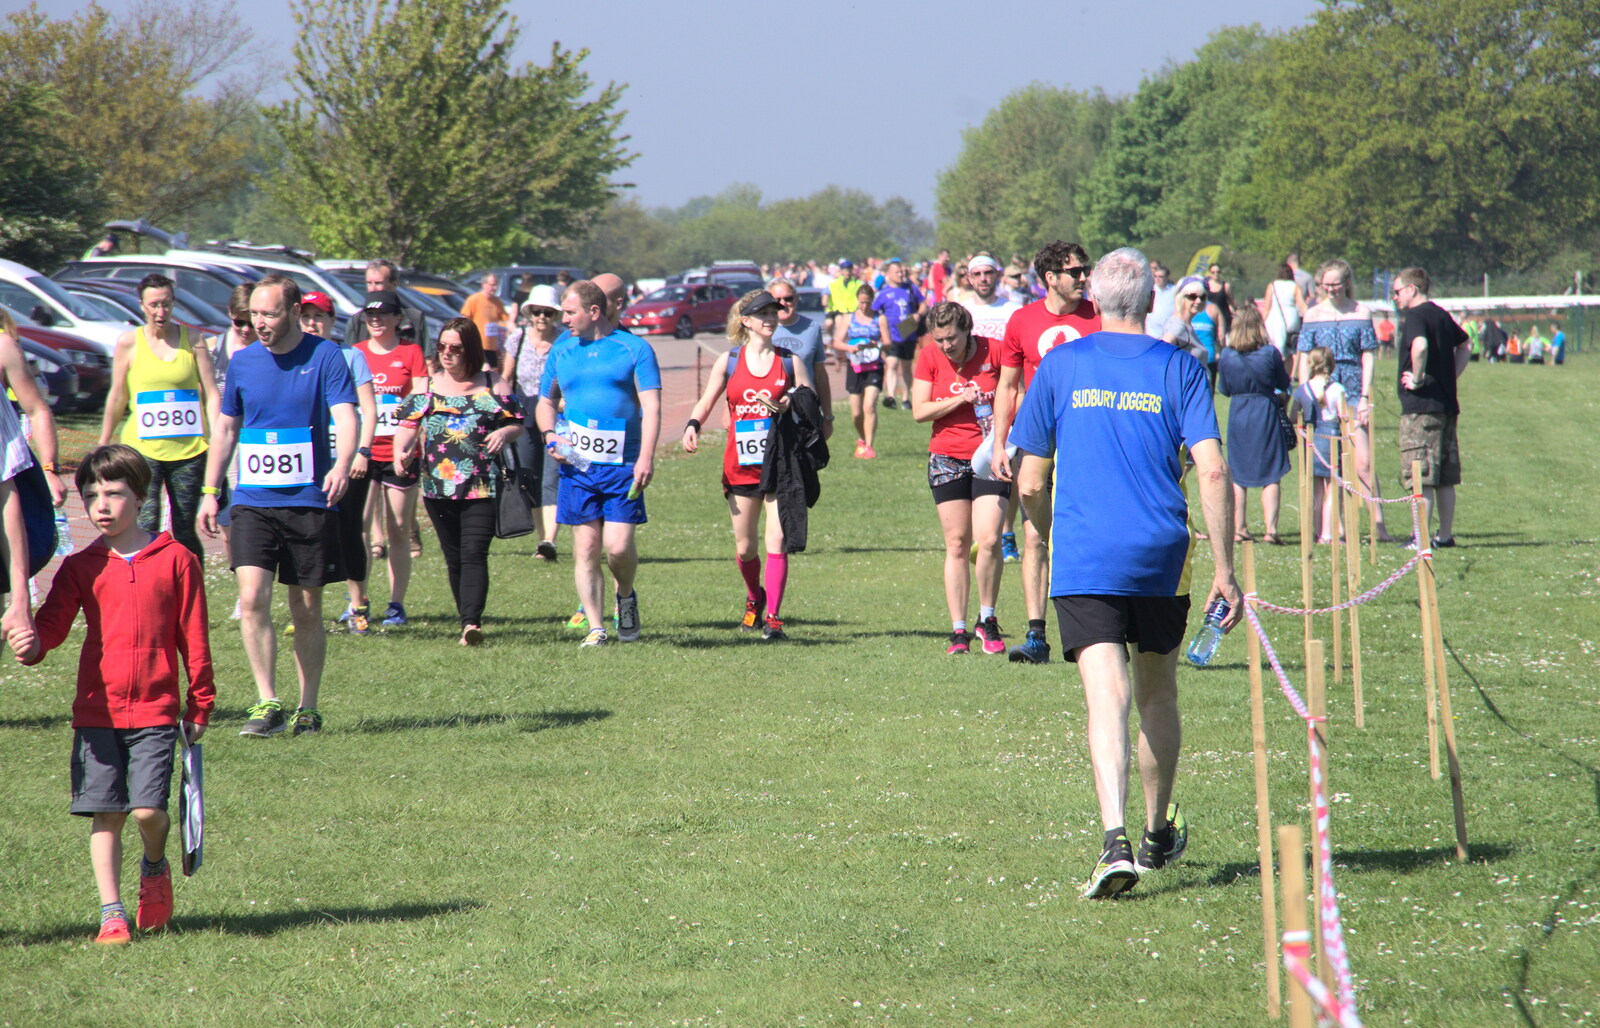 More entrants and supporters from Isobel's 10km Run, Alton Water, Stutton, Suffolk - 6th May 2018